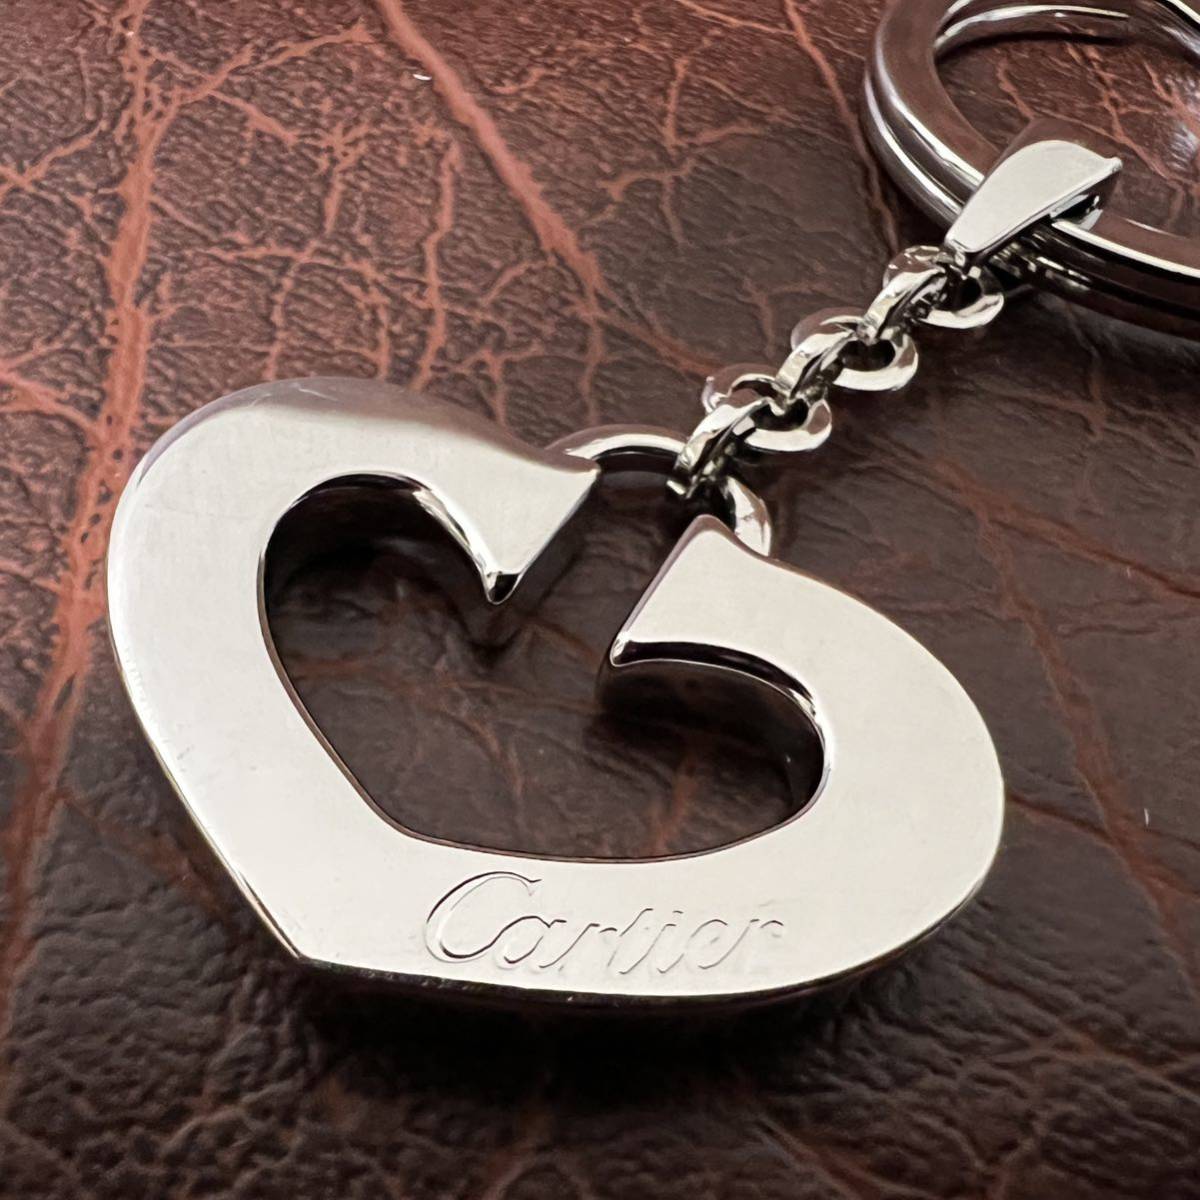 Cartier Cartier key holder key ring charm silver color Heart 